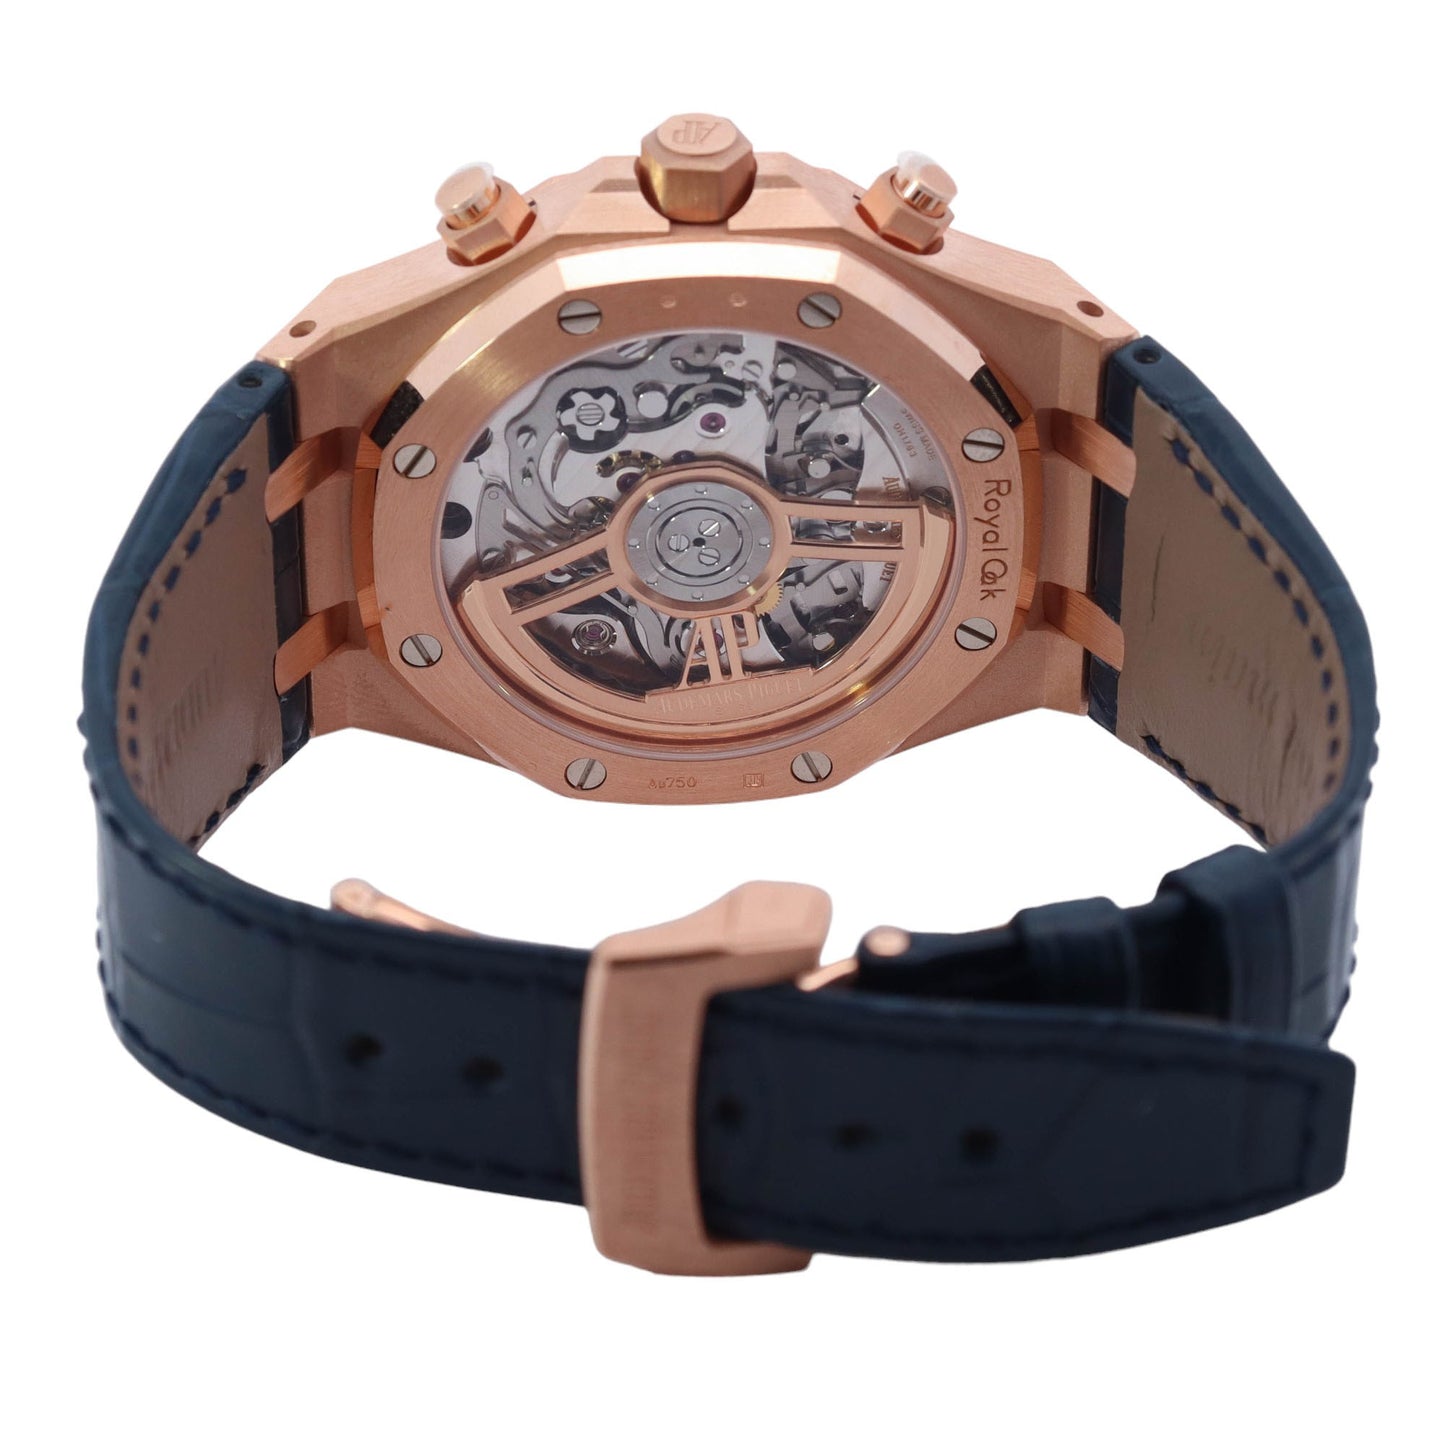 Audemars Piguet Royal Oak 41mm Rose Gold Blue Chronograph Dial Watch Reference# 26240OR.OO.D315CR.02